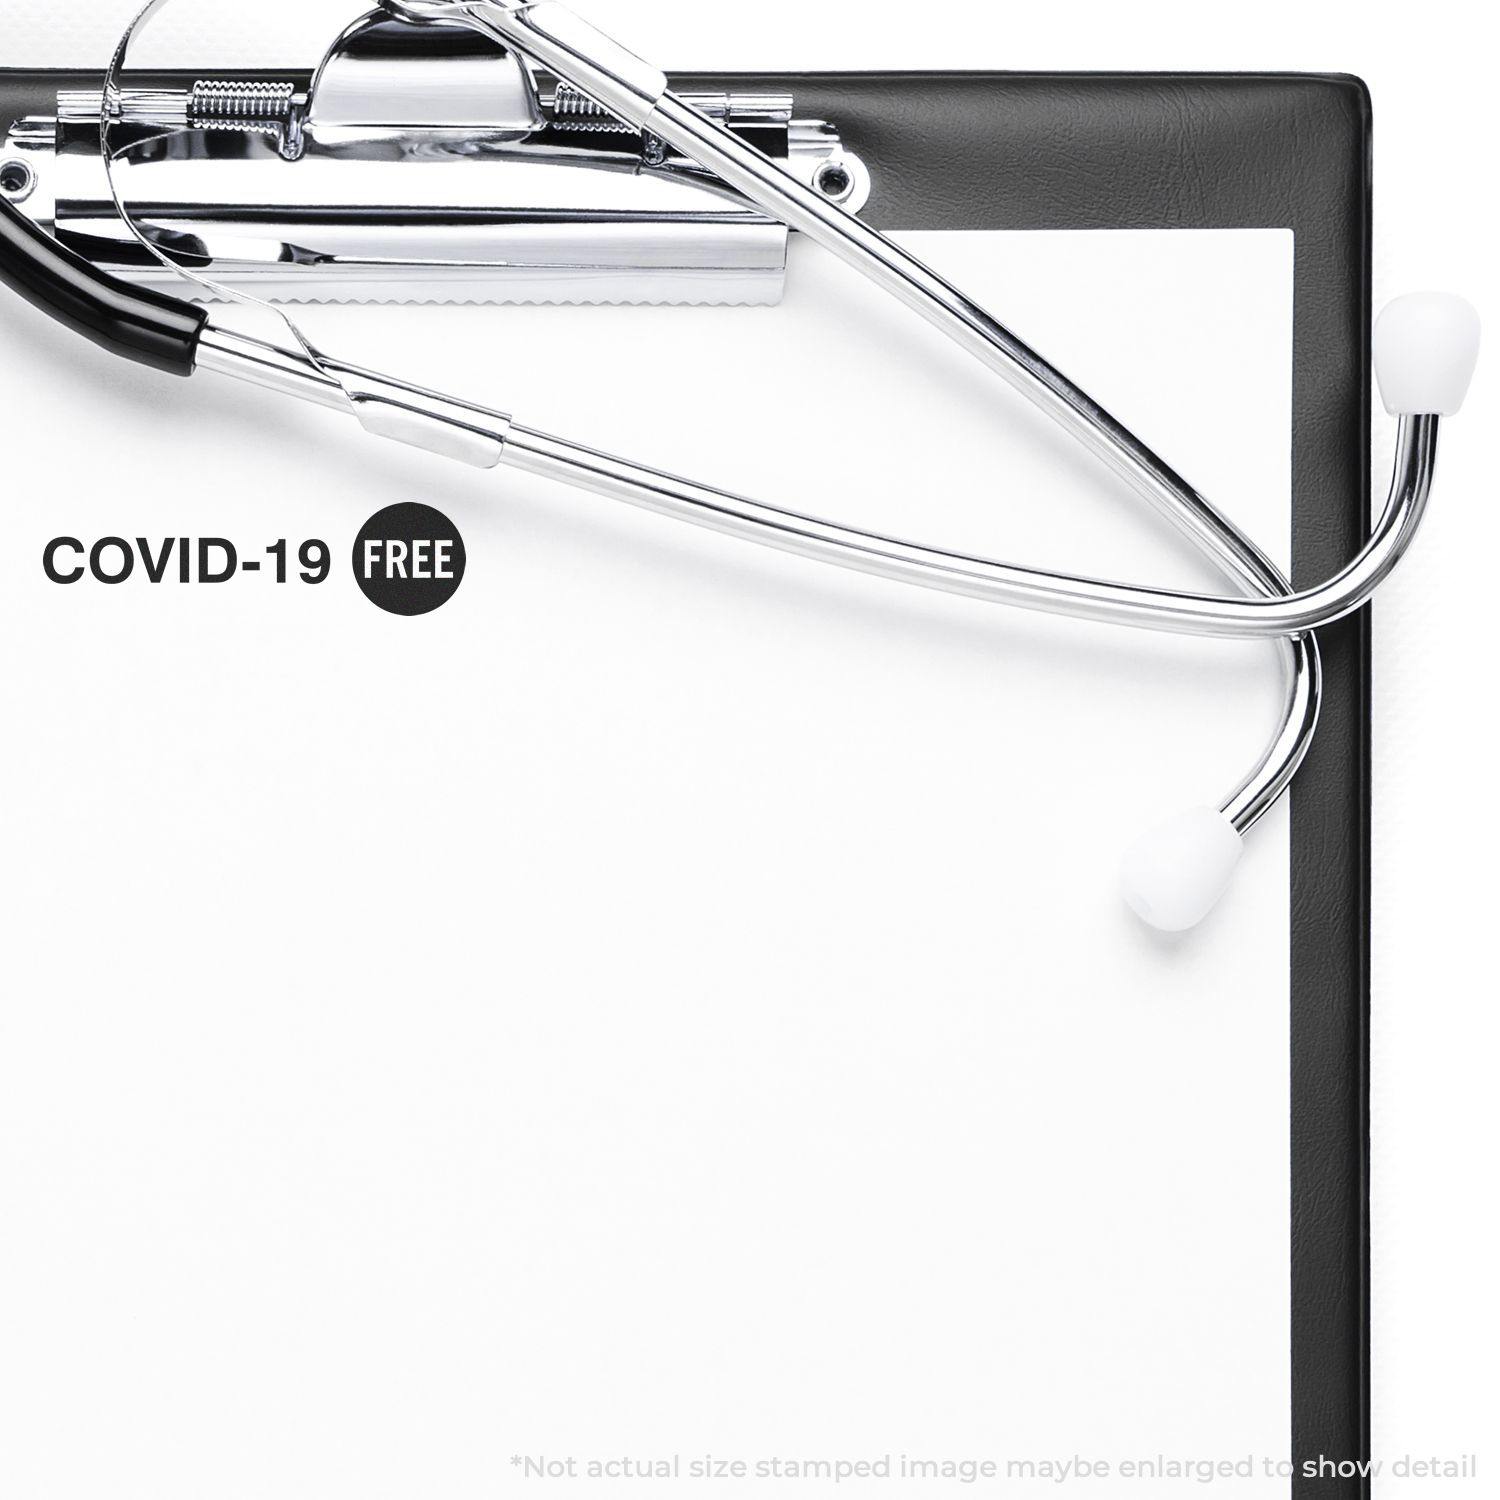 A self-inking stamp with a stamped image showing how the text "COVID-19" with a "FREE" signboard on the right is displayed after stamping.